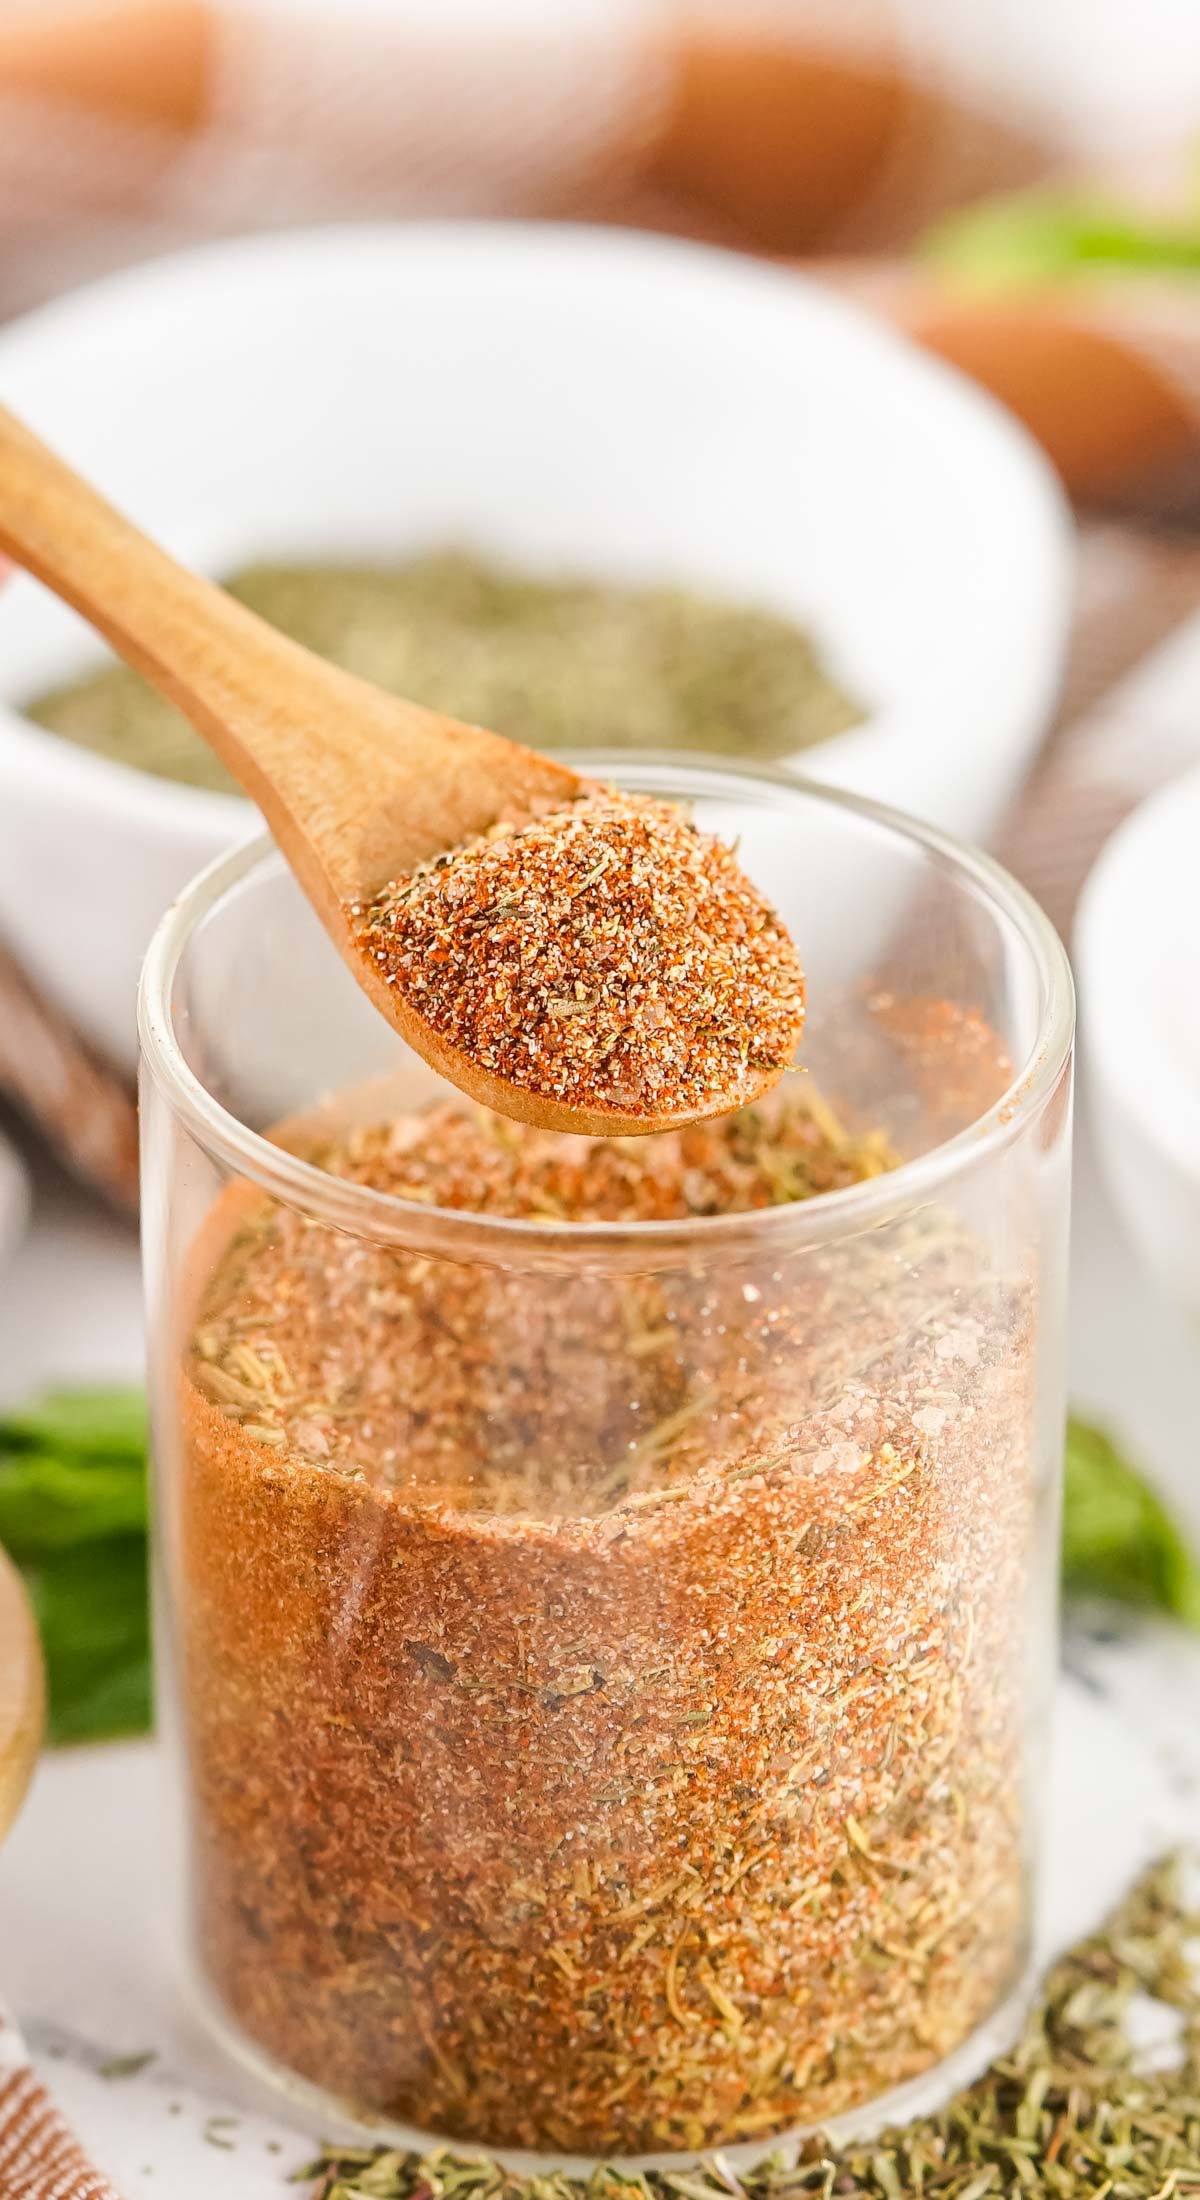 A wooden spoon taking a mix of the various spices.